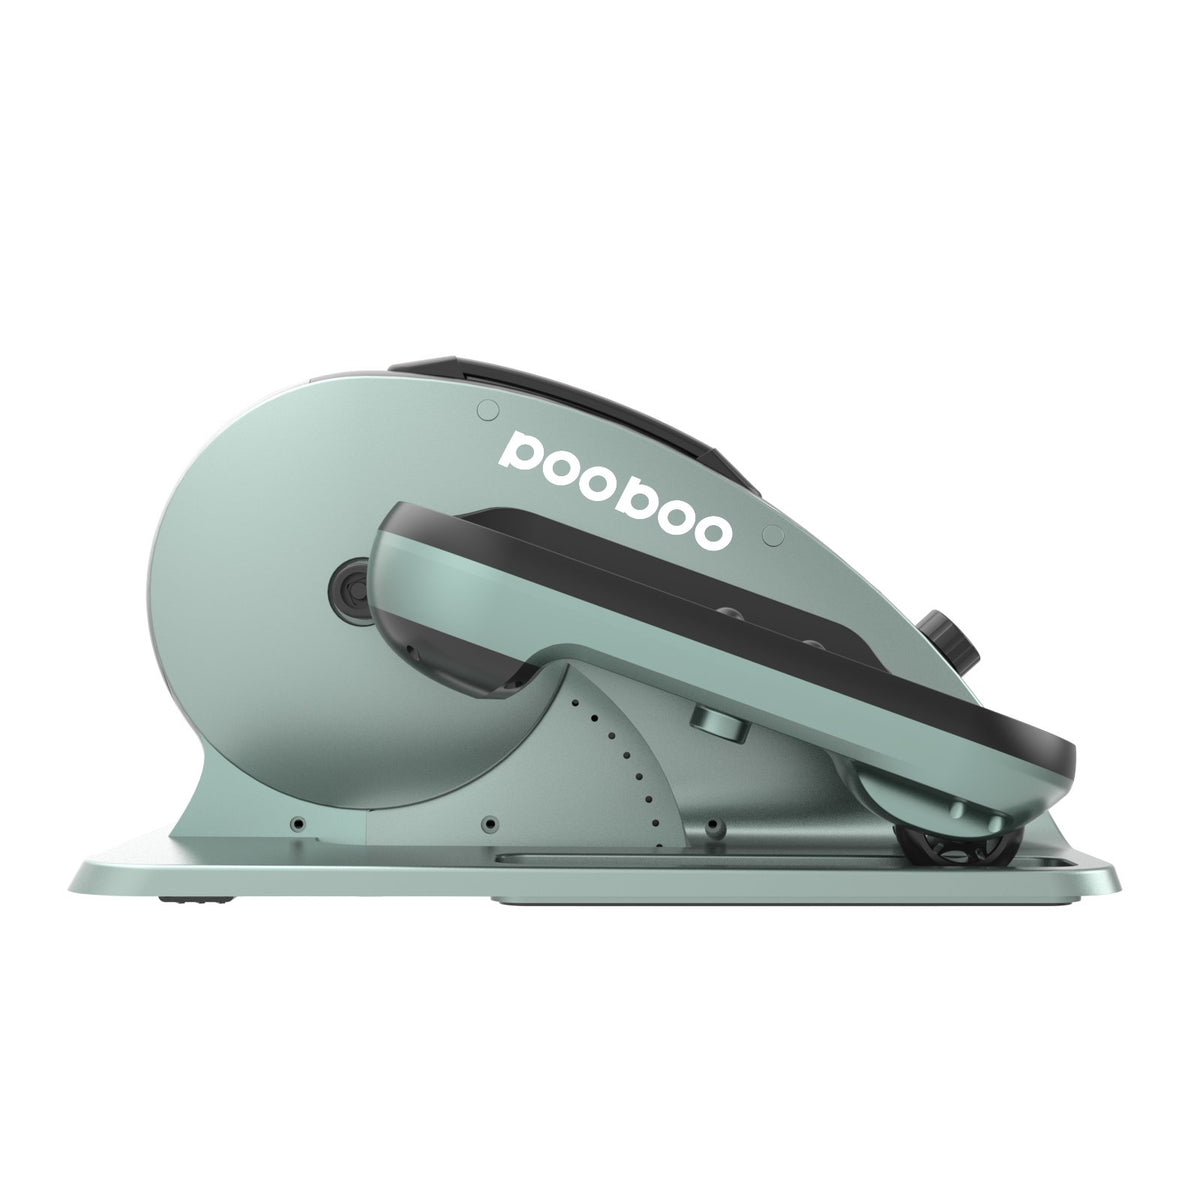 Pooboo Professional Under Desk Magnetic Elliptical Machine with Foot Massage  Fully Assembled Quiet Seated Adjustable Resistance Foot Pedal Exerciser 